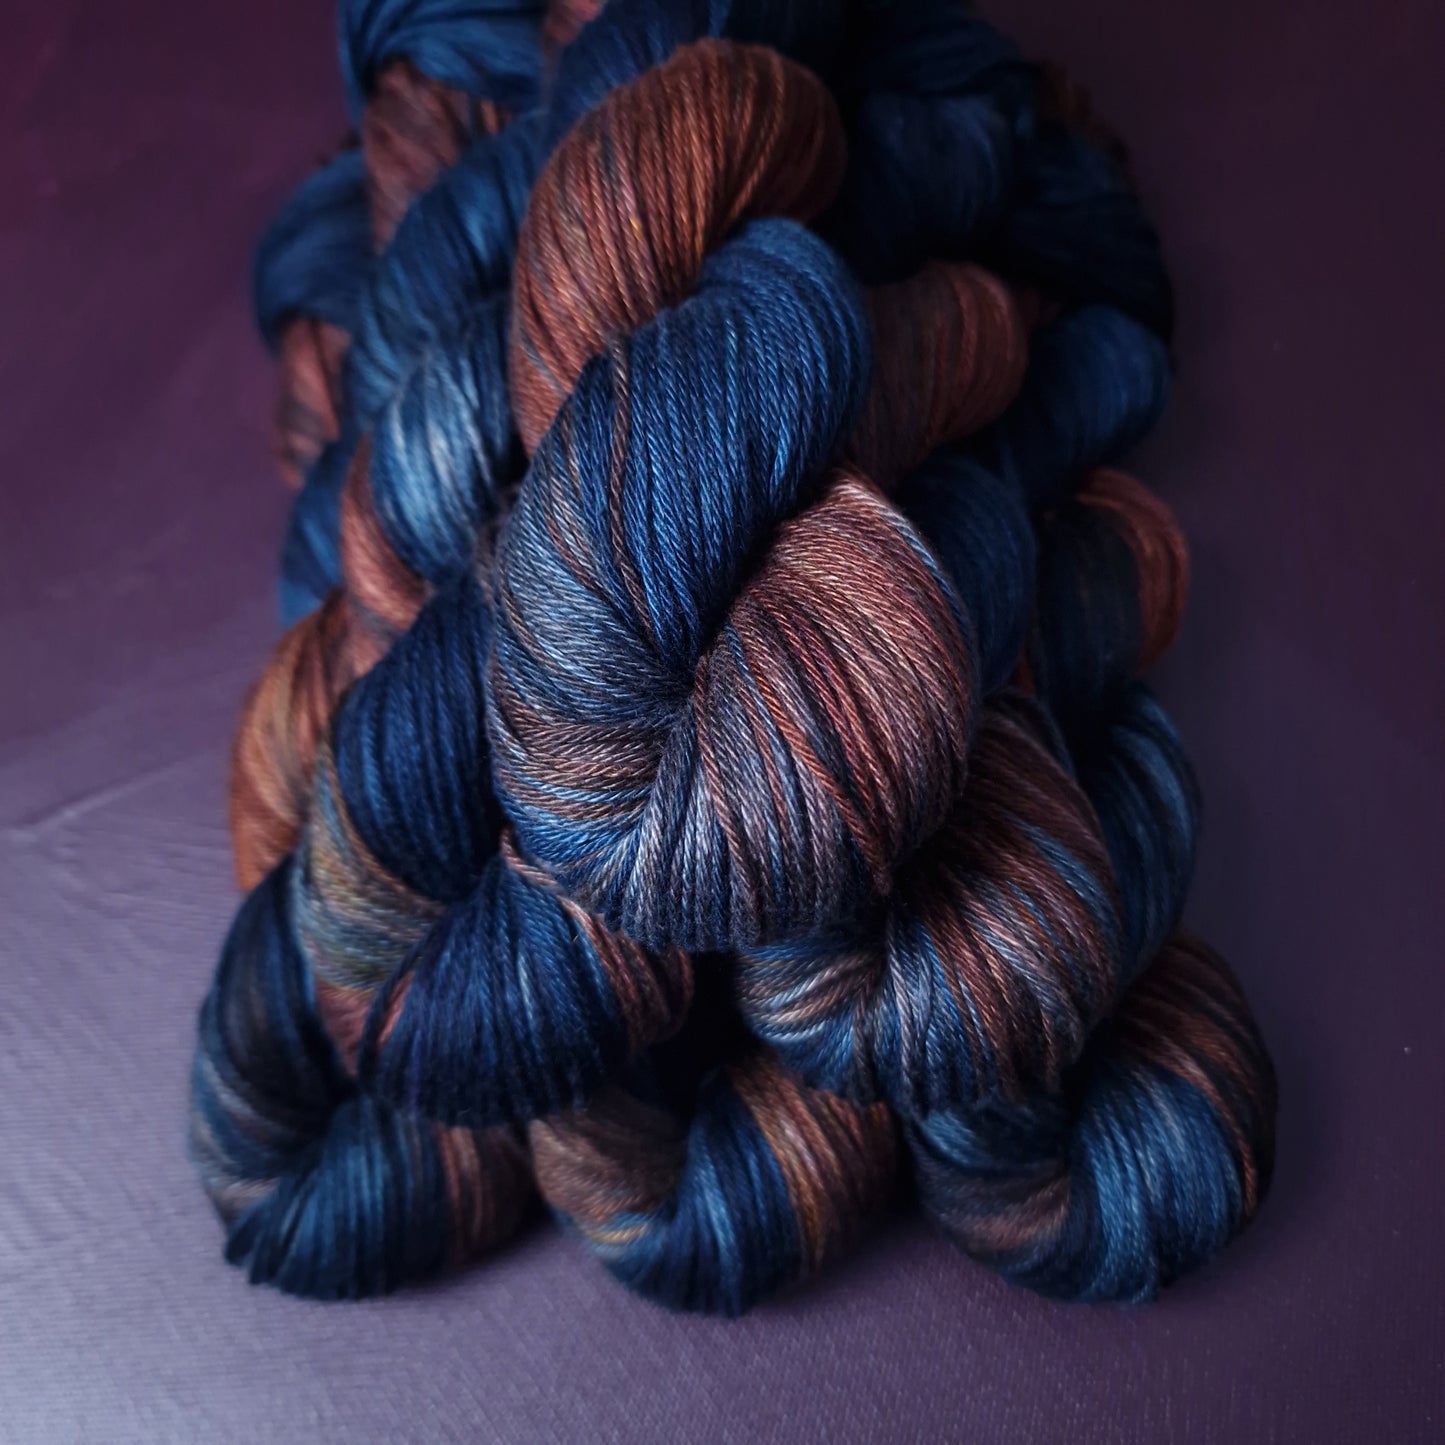 Hand dyed yarn ~ Moody Sunset ~ mercerized cotton yarn, vegan, hand painted, indie dyed